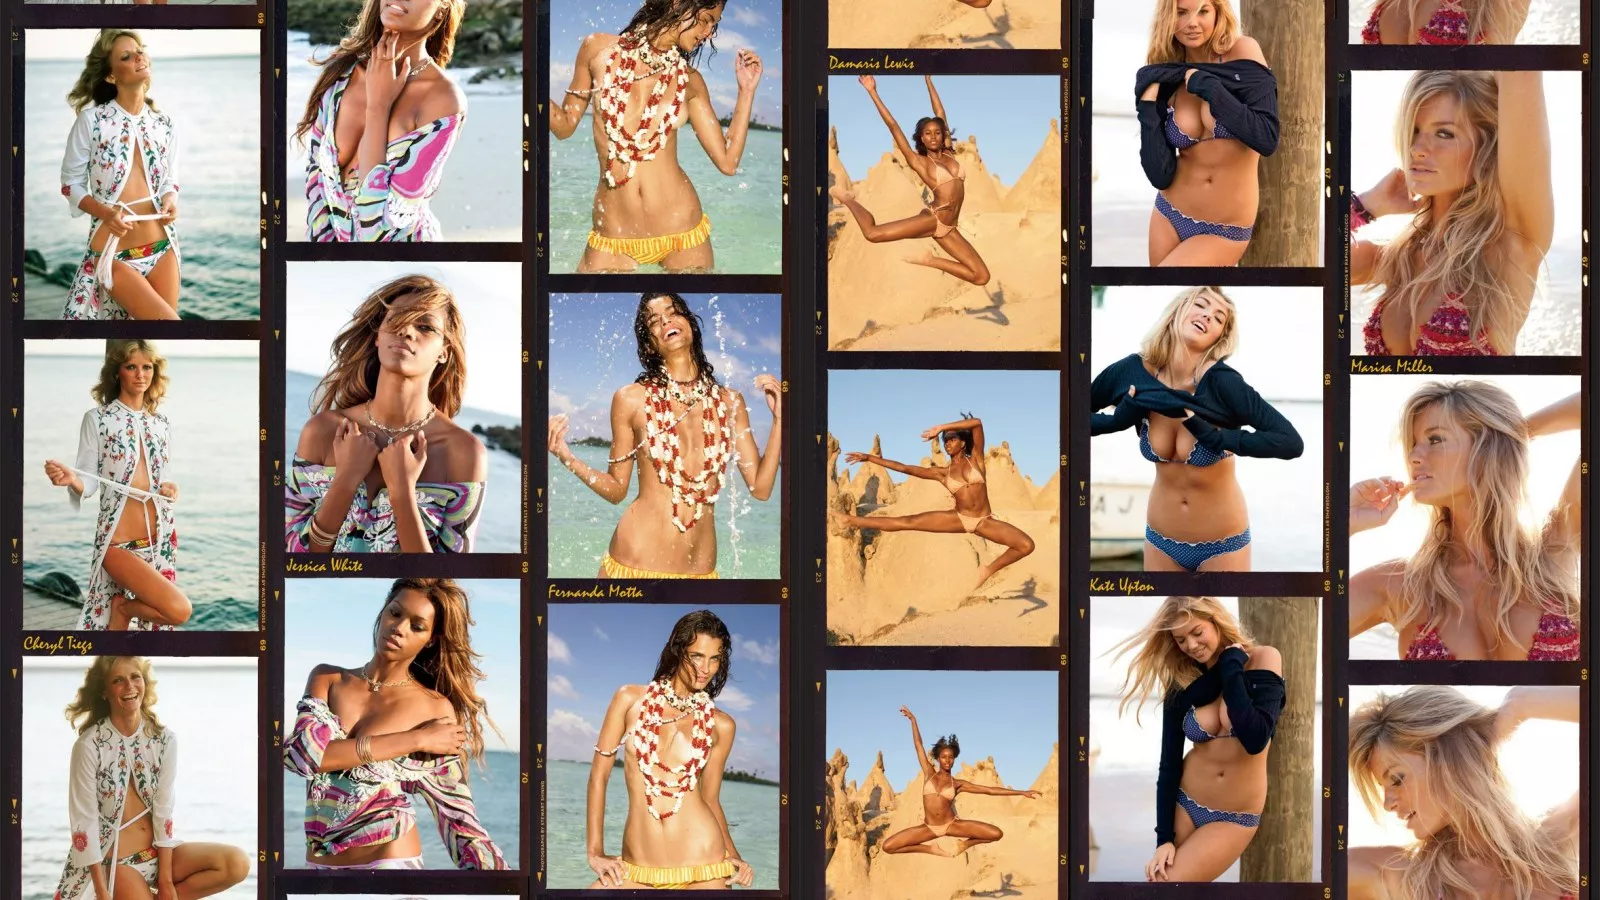 Sports Illustrated models go nude in swimsuit issue (but cover up with body  paint)